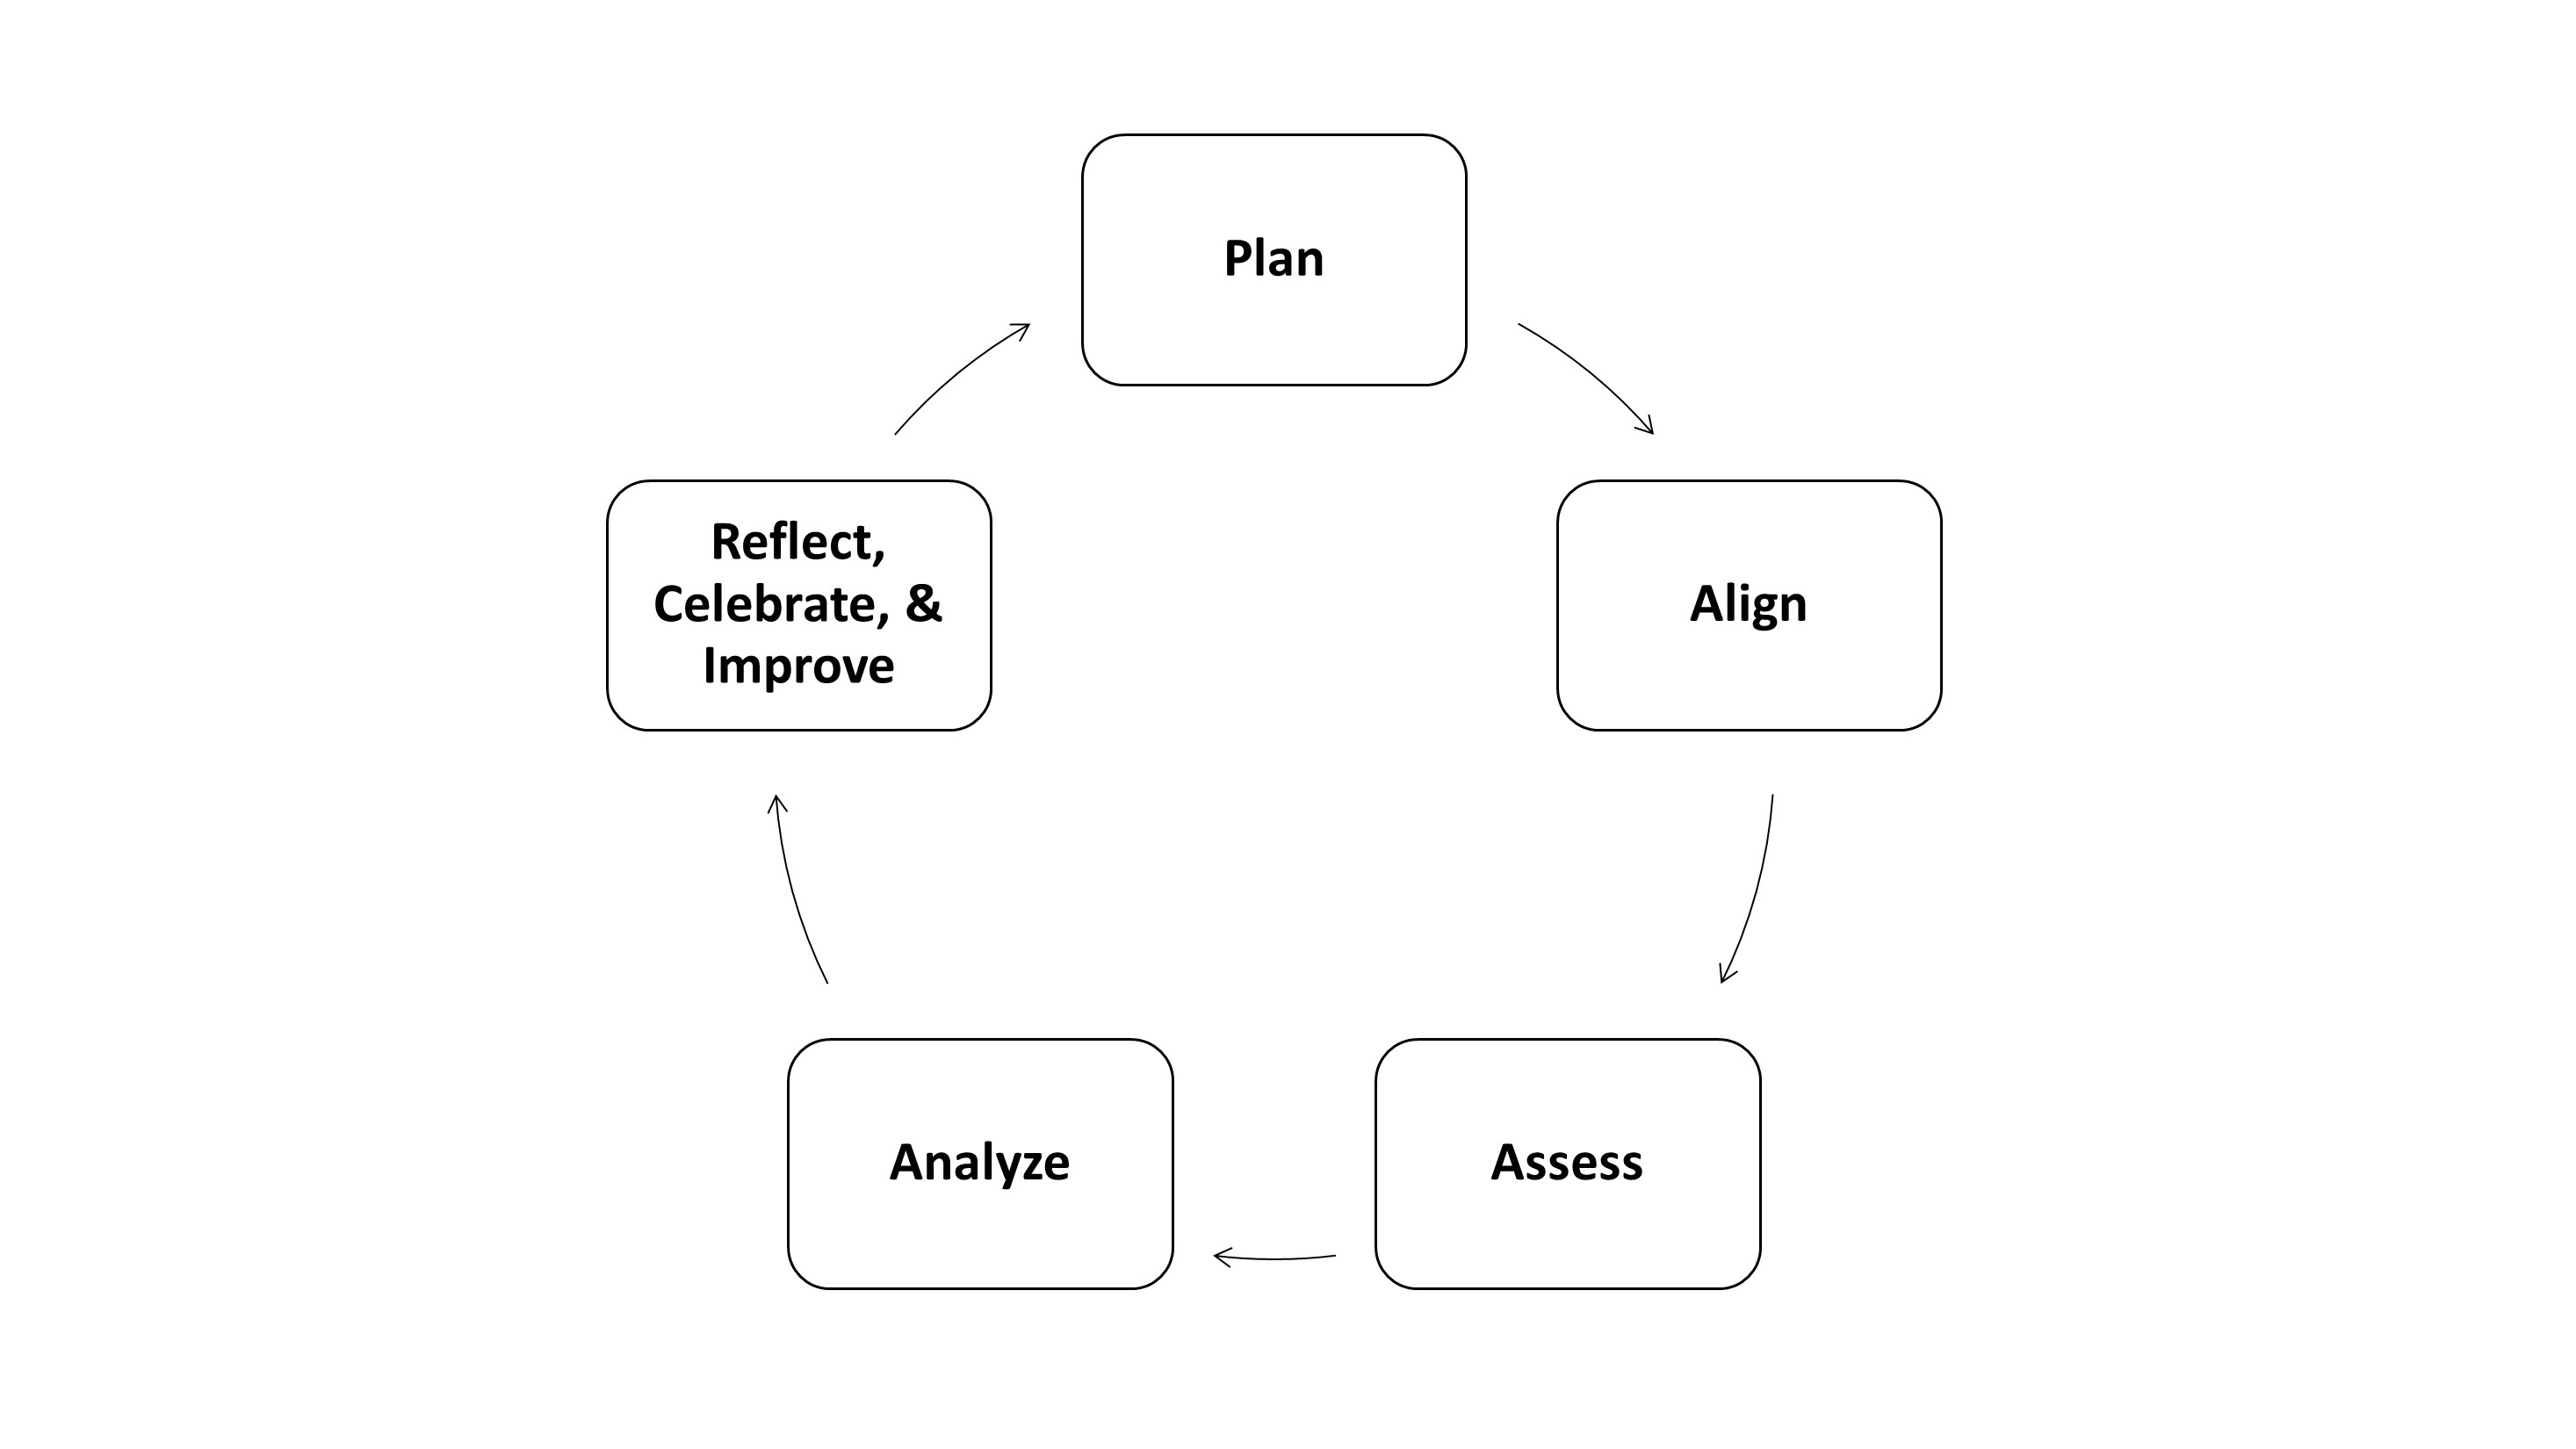 assessment cycle